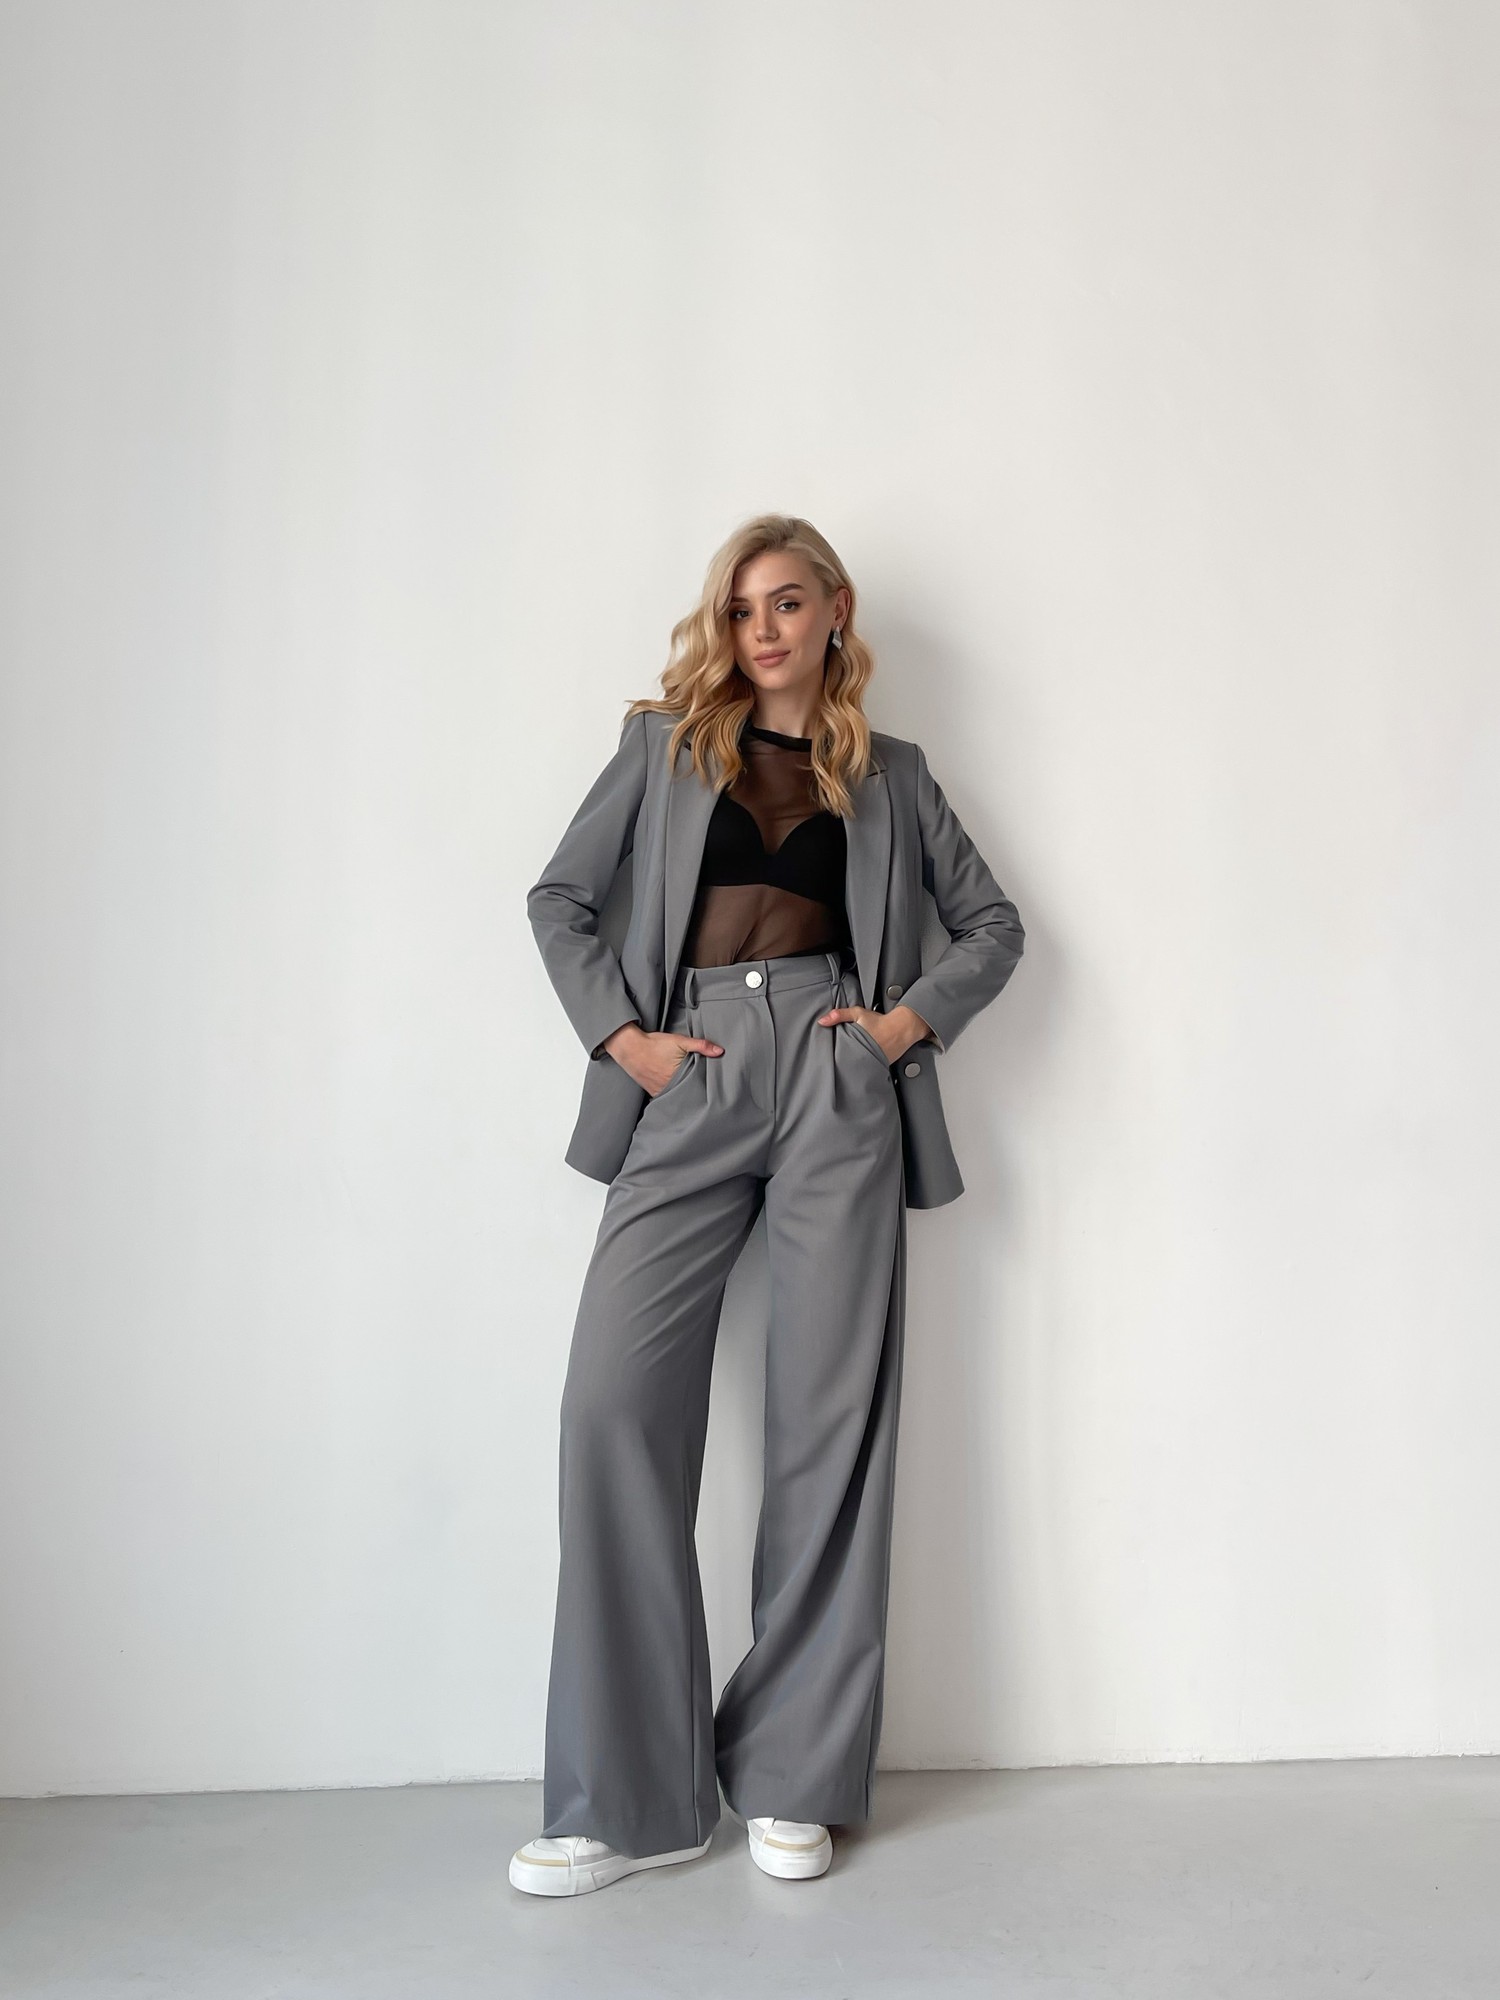 Suit jacket loose fit and maxi palazzo pants grey-blue